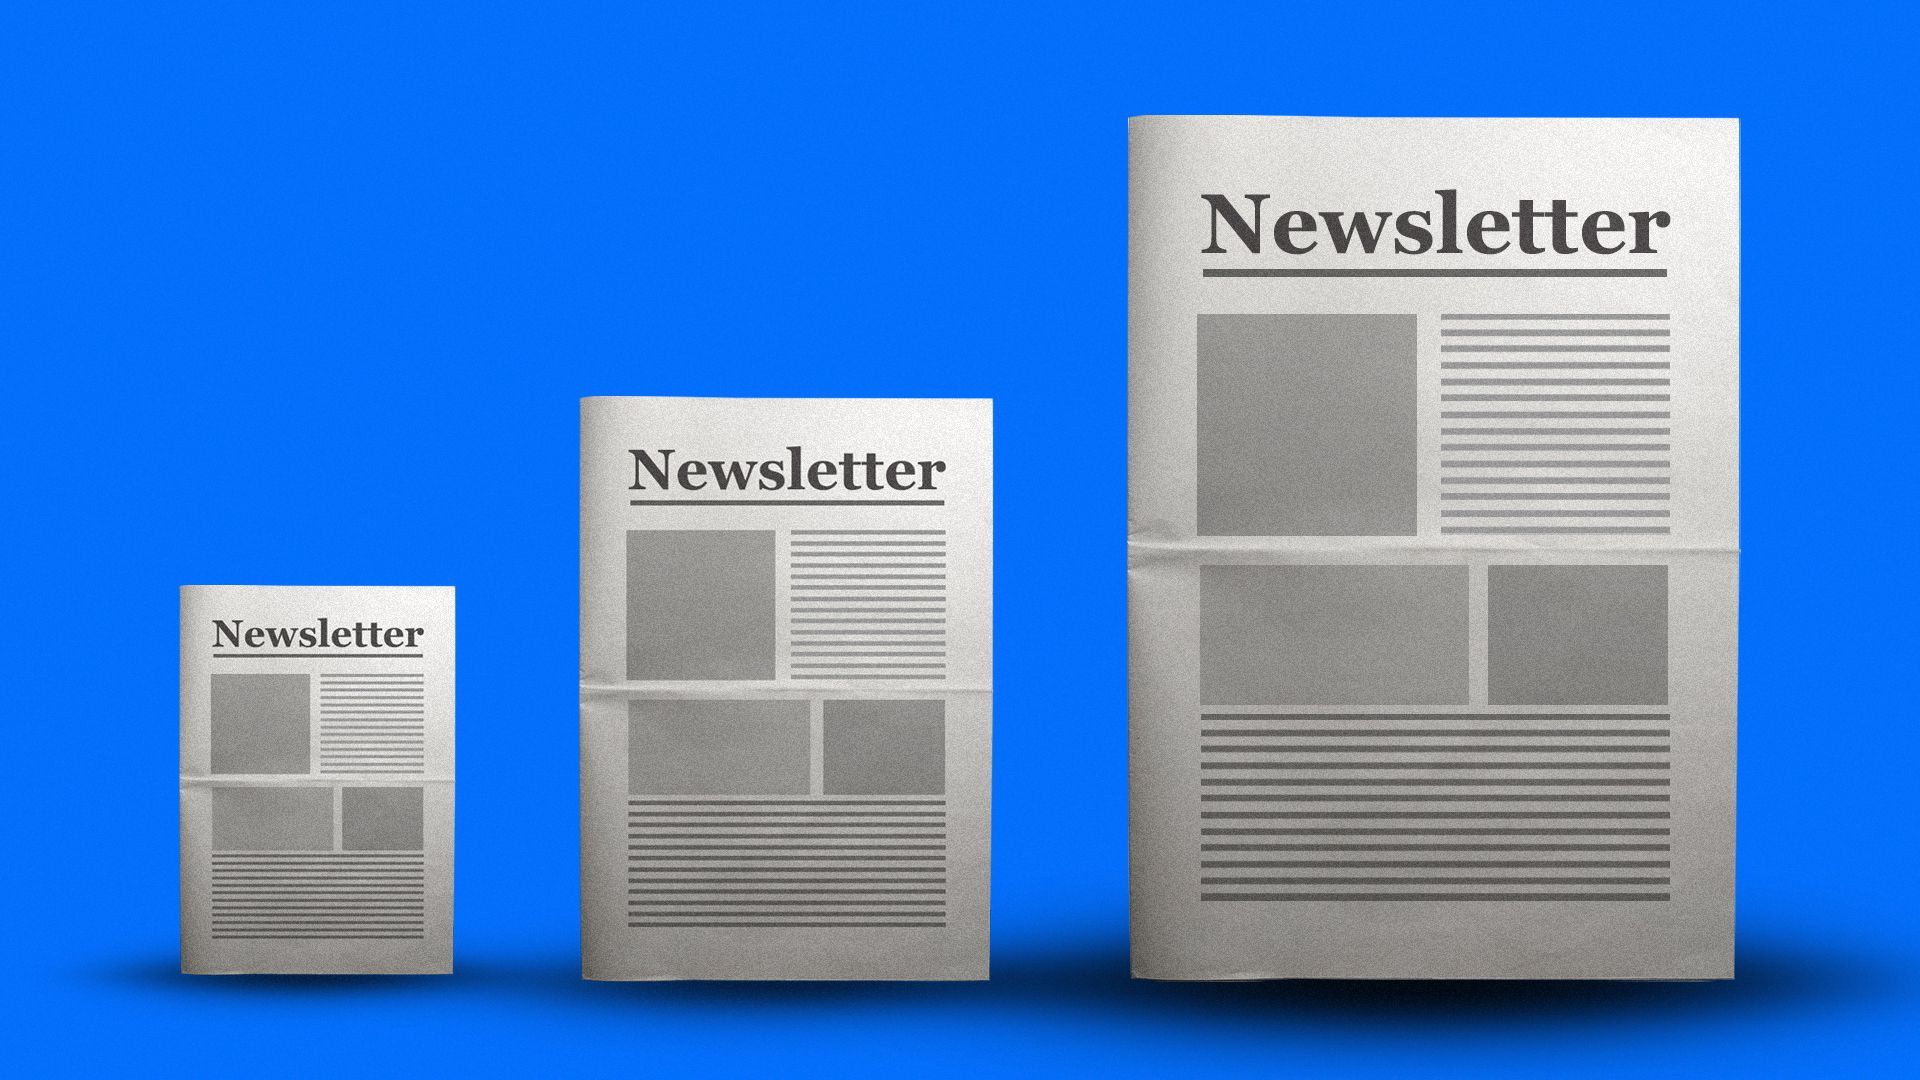 Illustration of a small newsletter next to a medium-sized newsletter, followed by a large newsletter